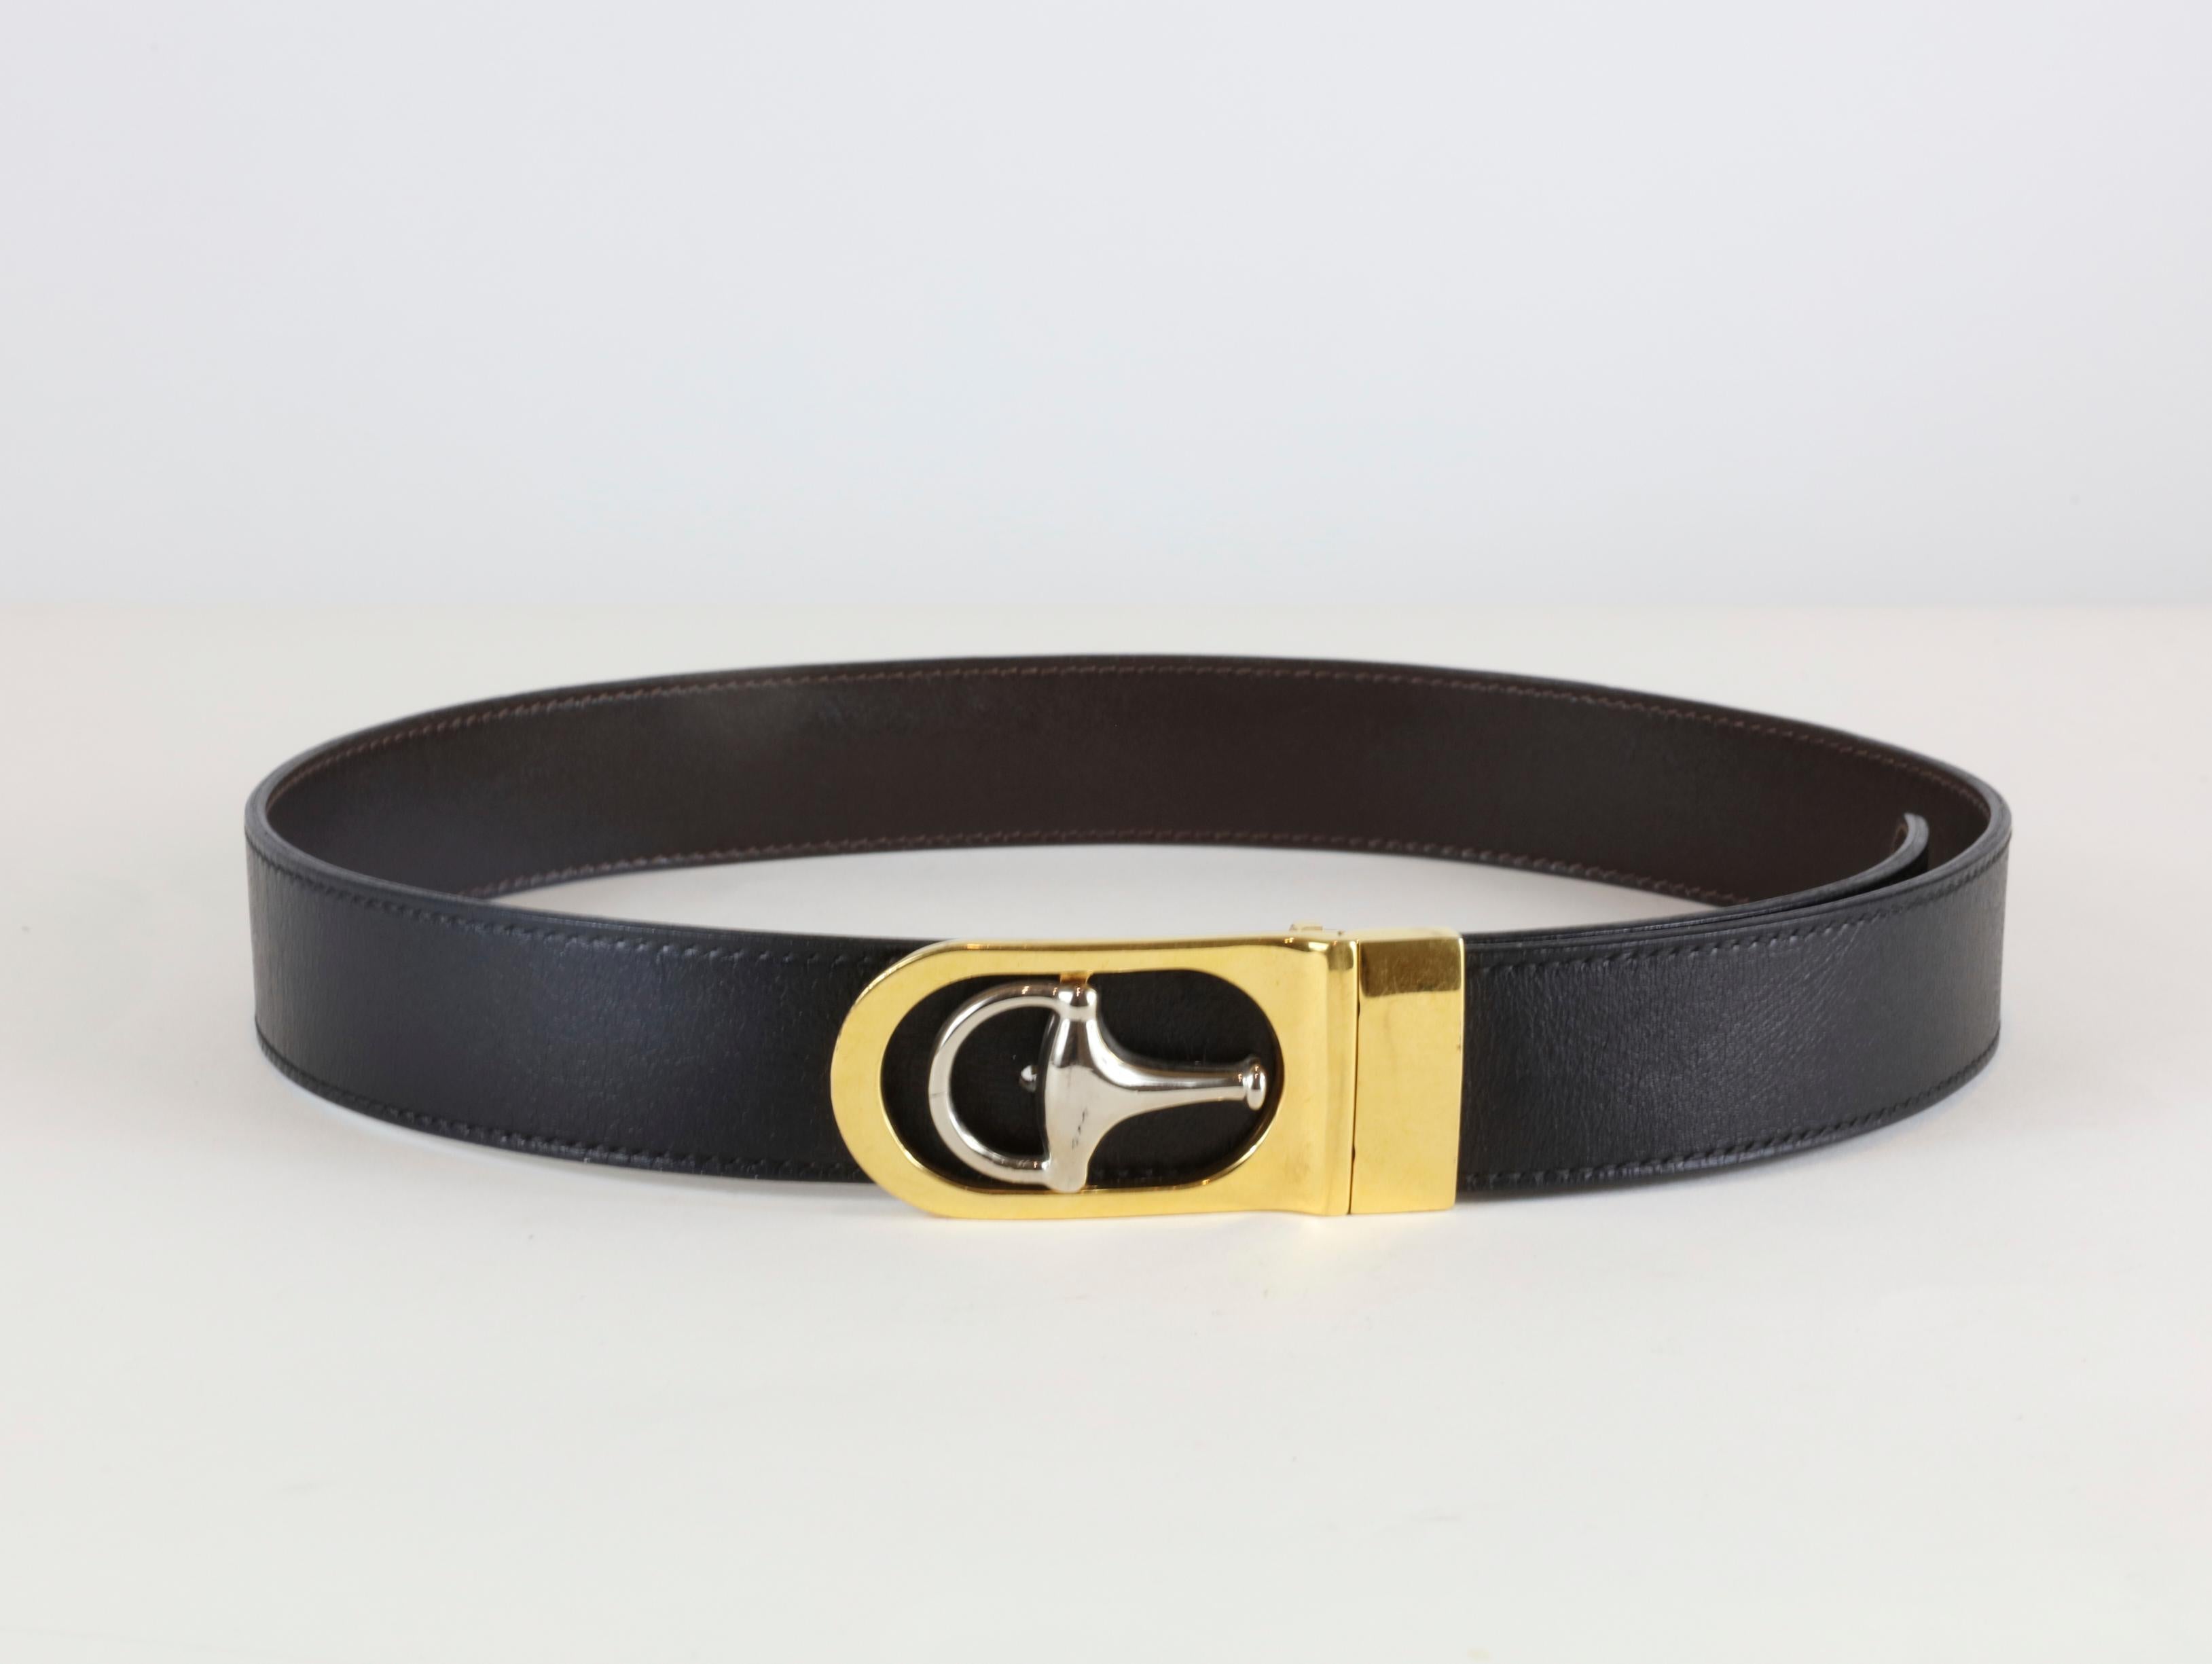 Gucci Black Leather Belt with Silver and Gold Hardware (Schwarz)